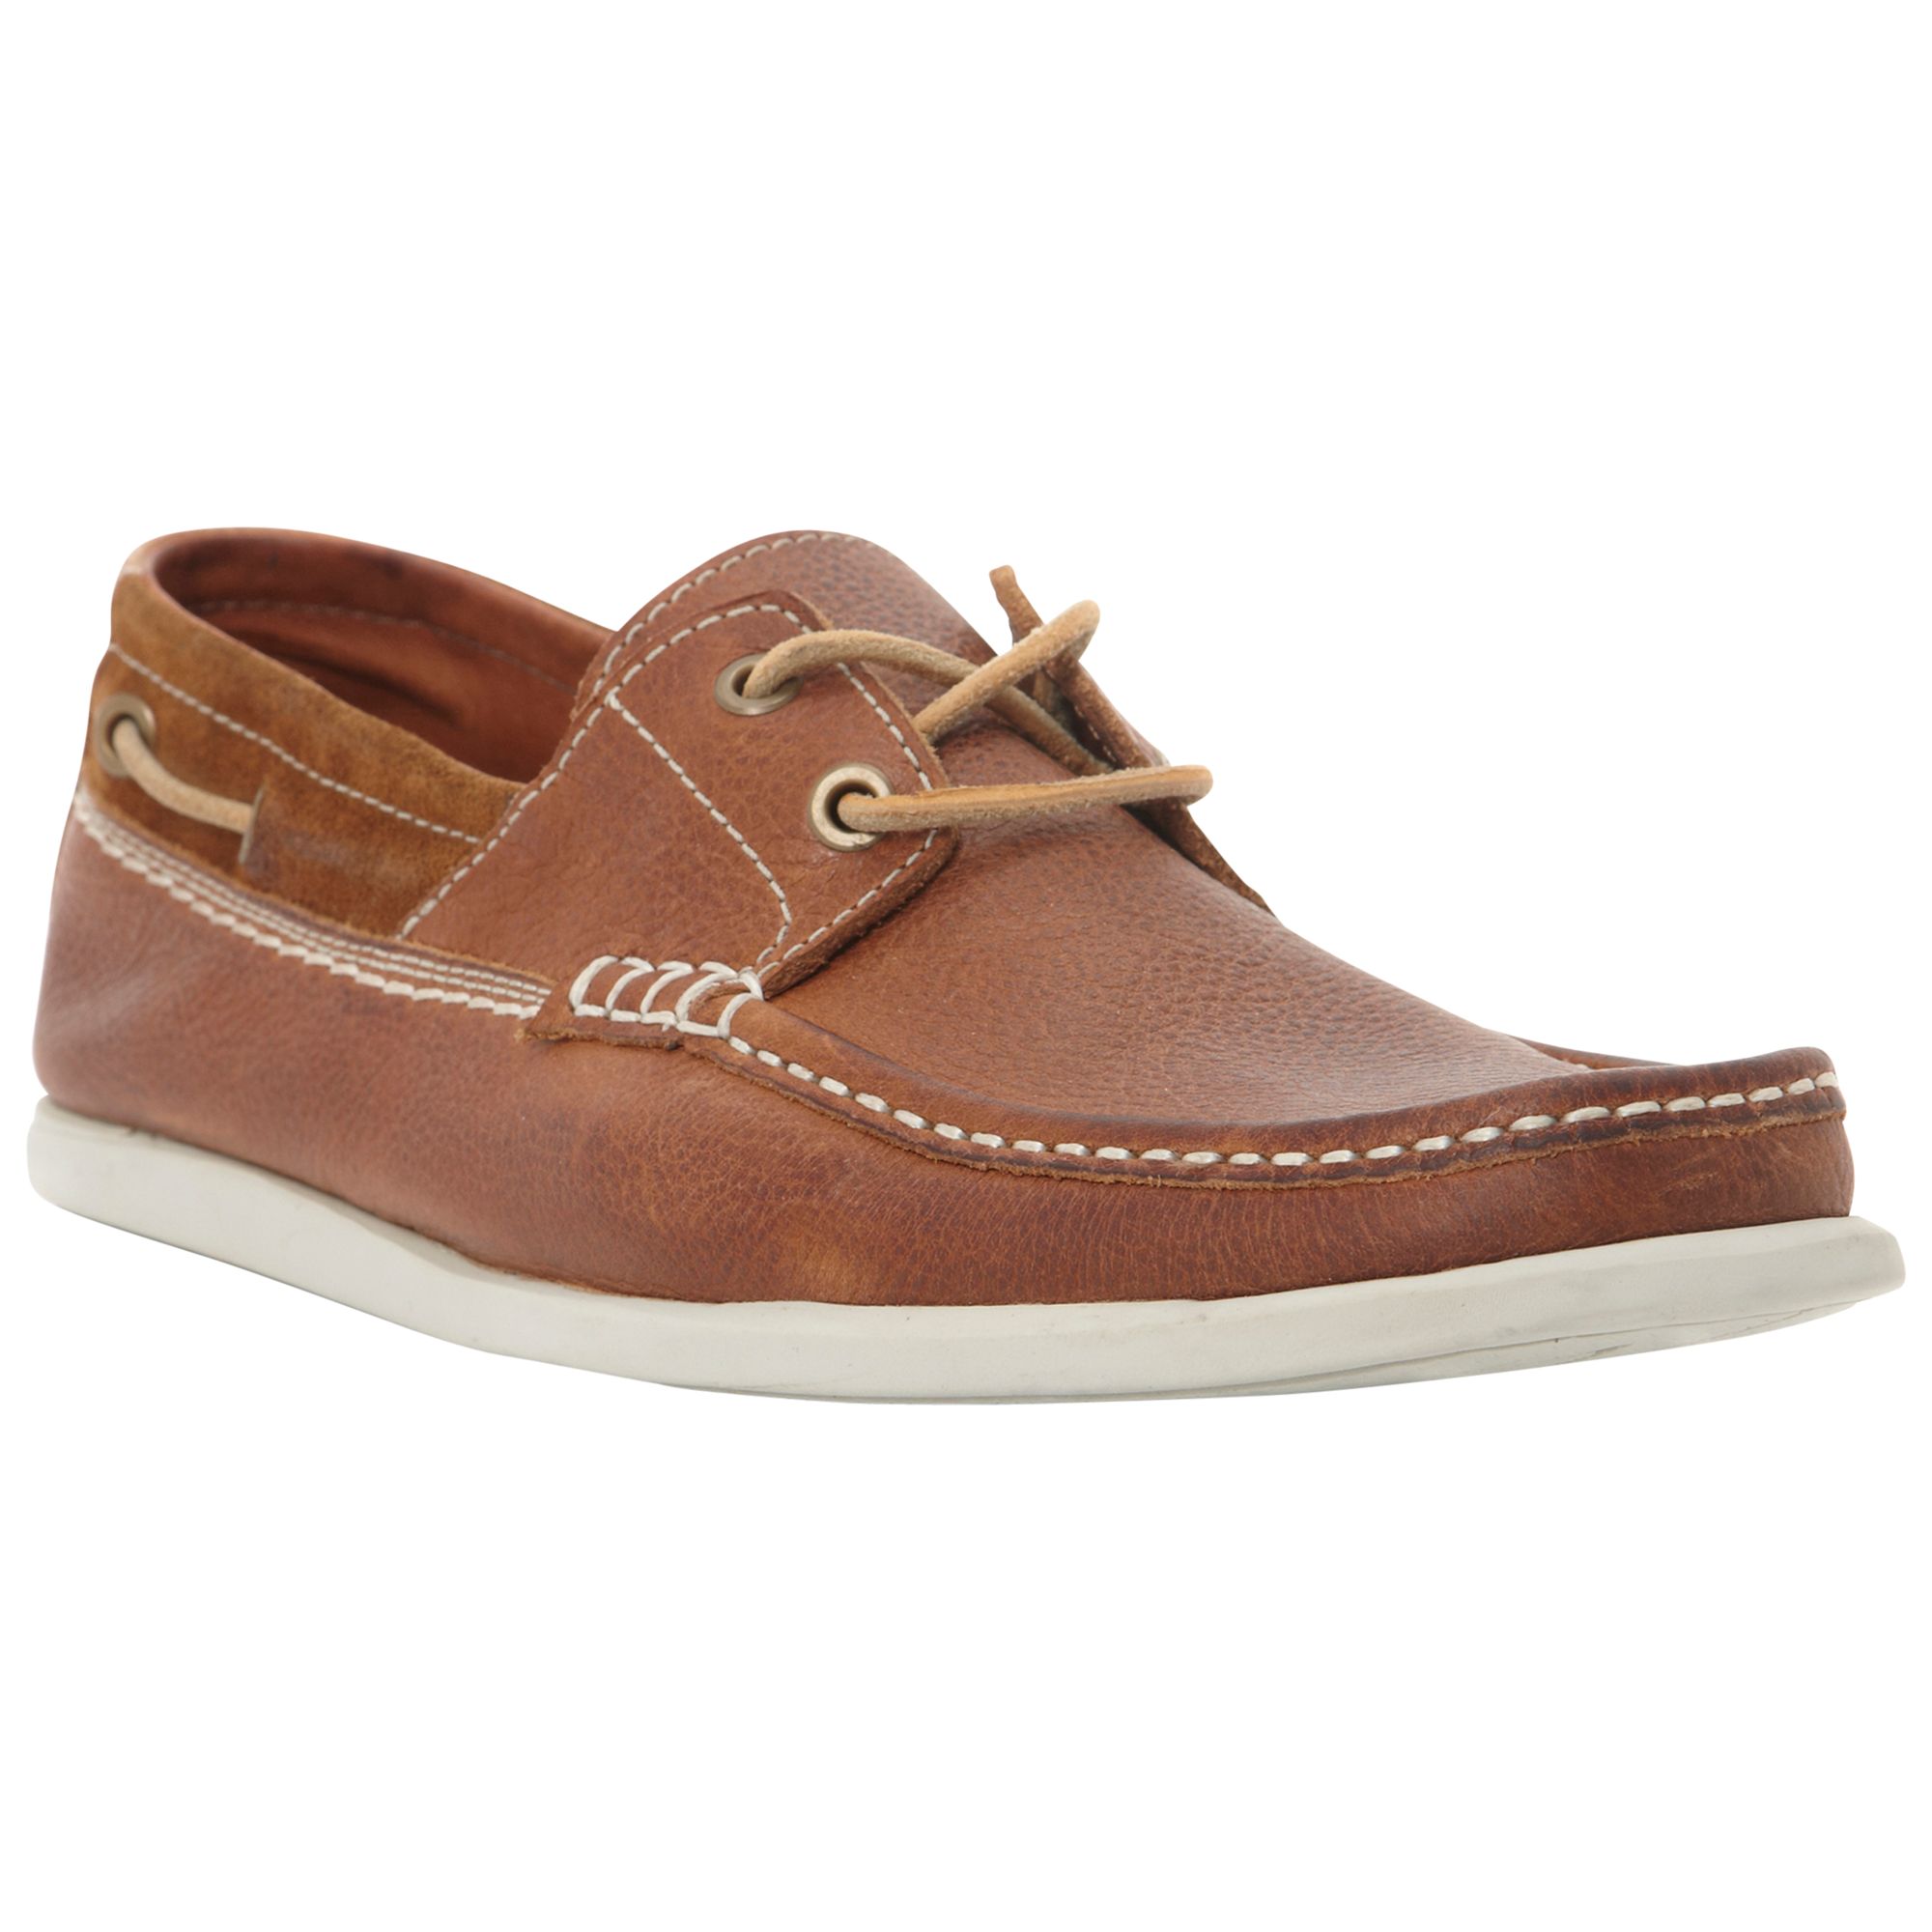 Dune Barracuda Square Toe Leather Boat Shoes